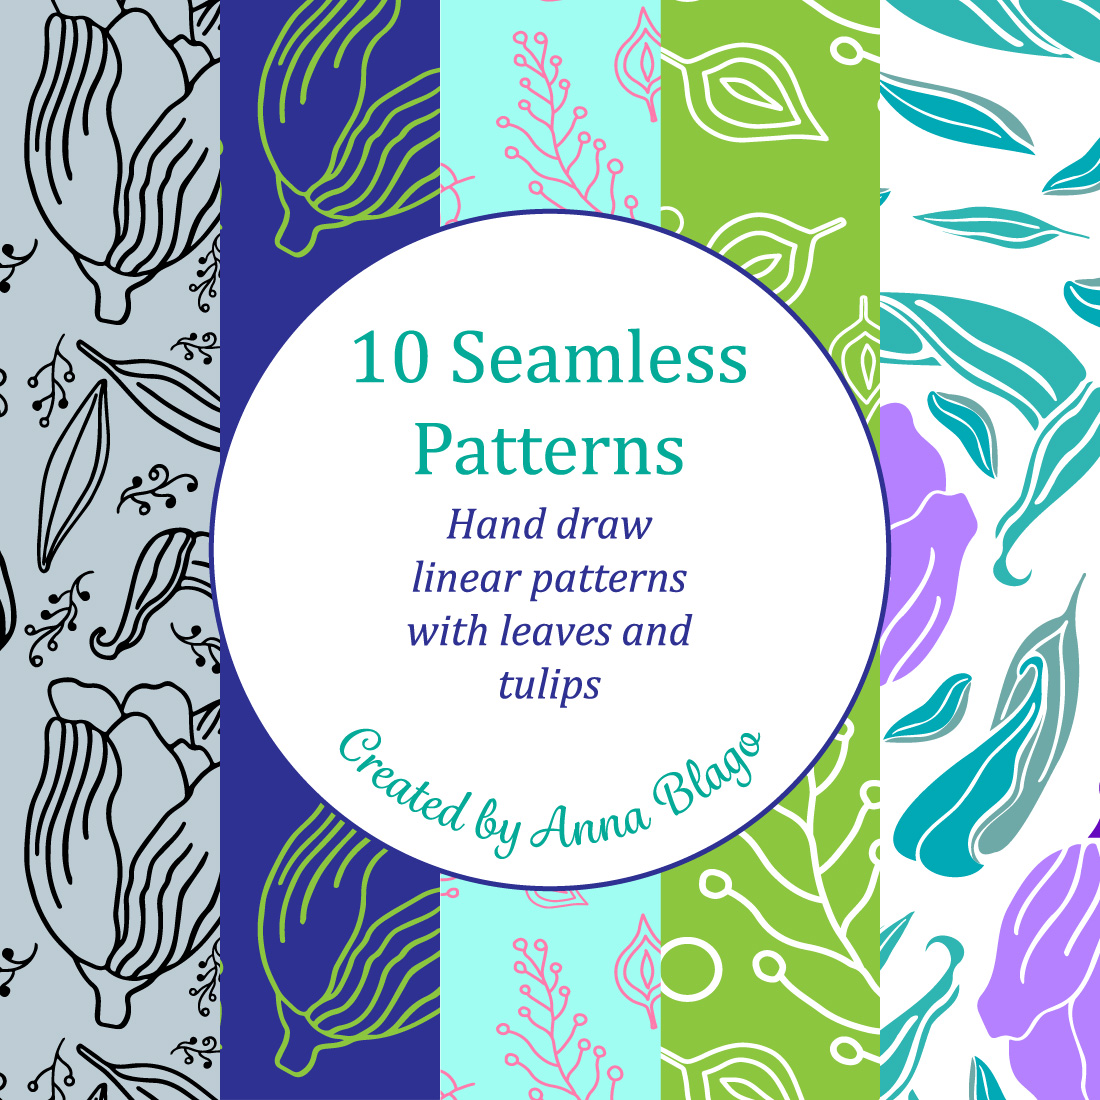 Seamless Hand draw Linear Patterns with Leaves and Tulips.